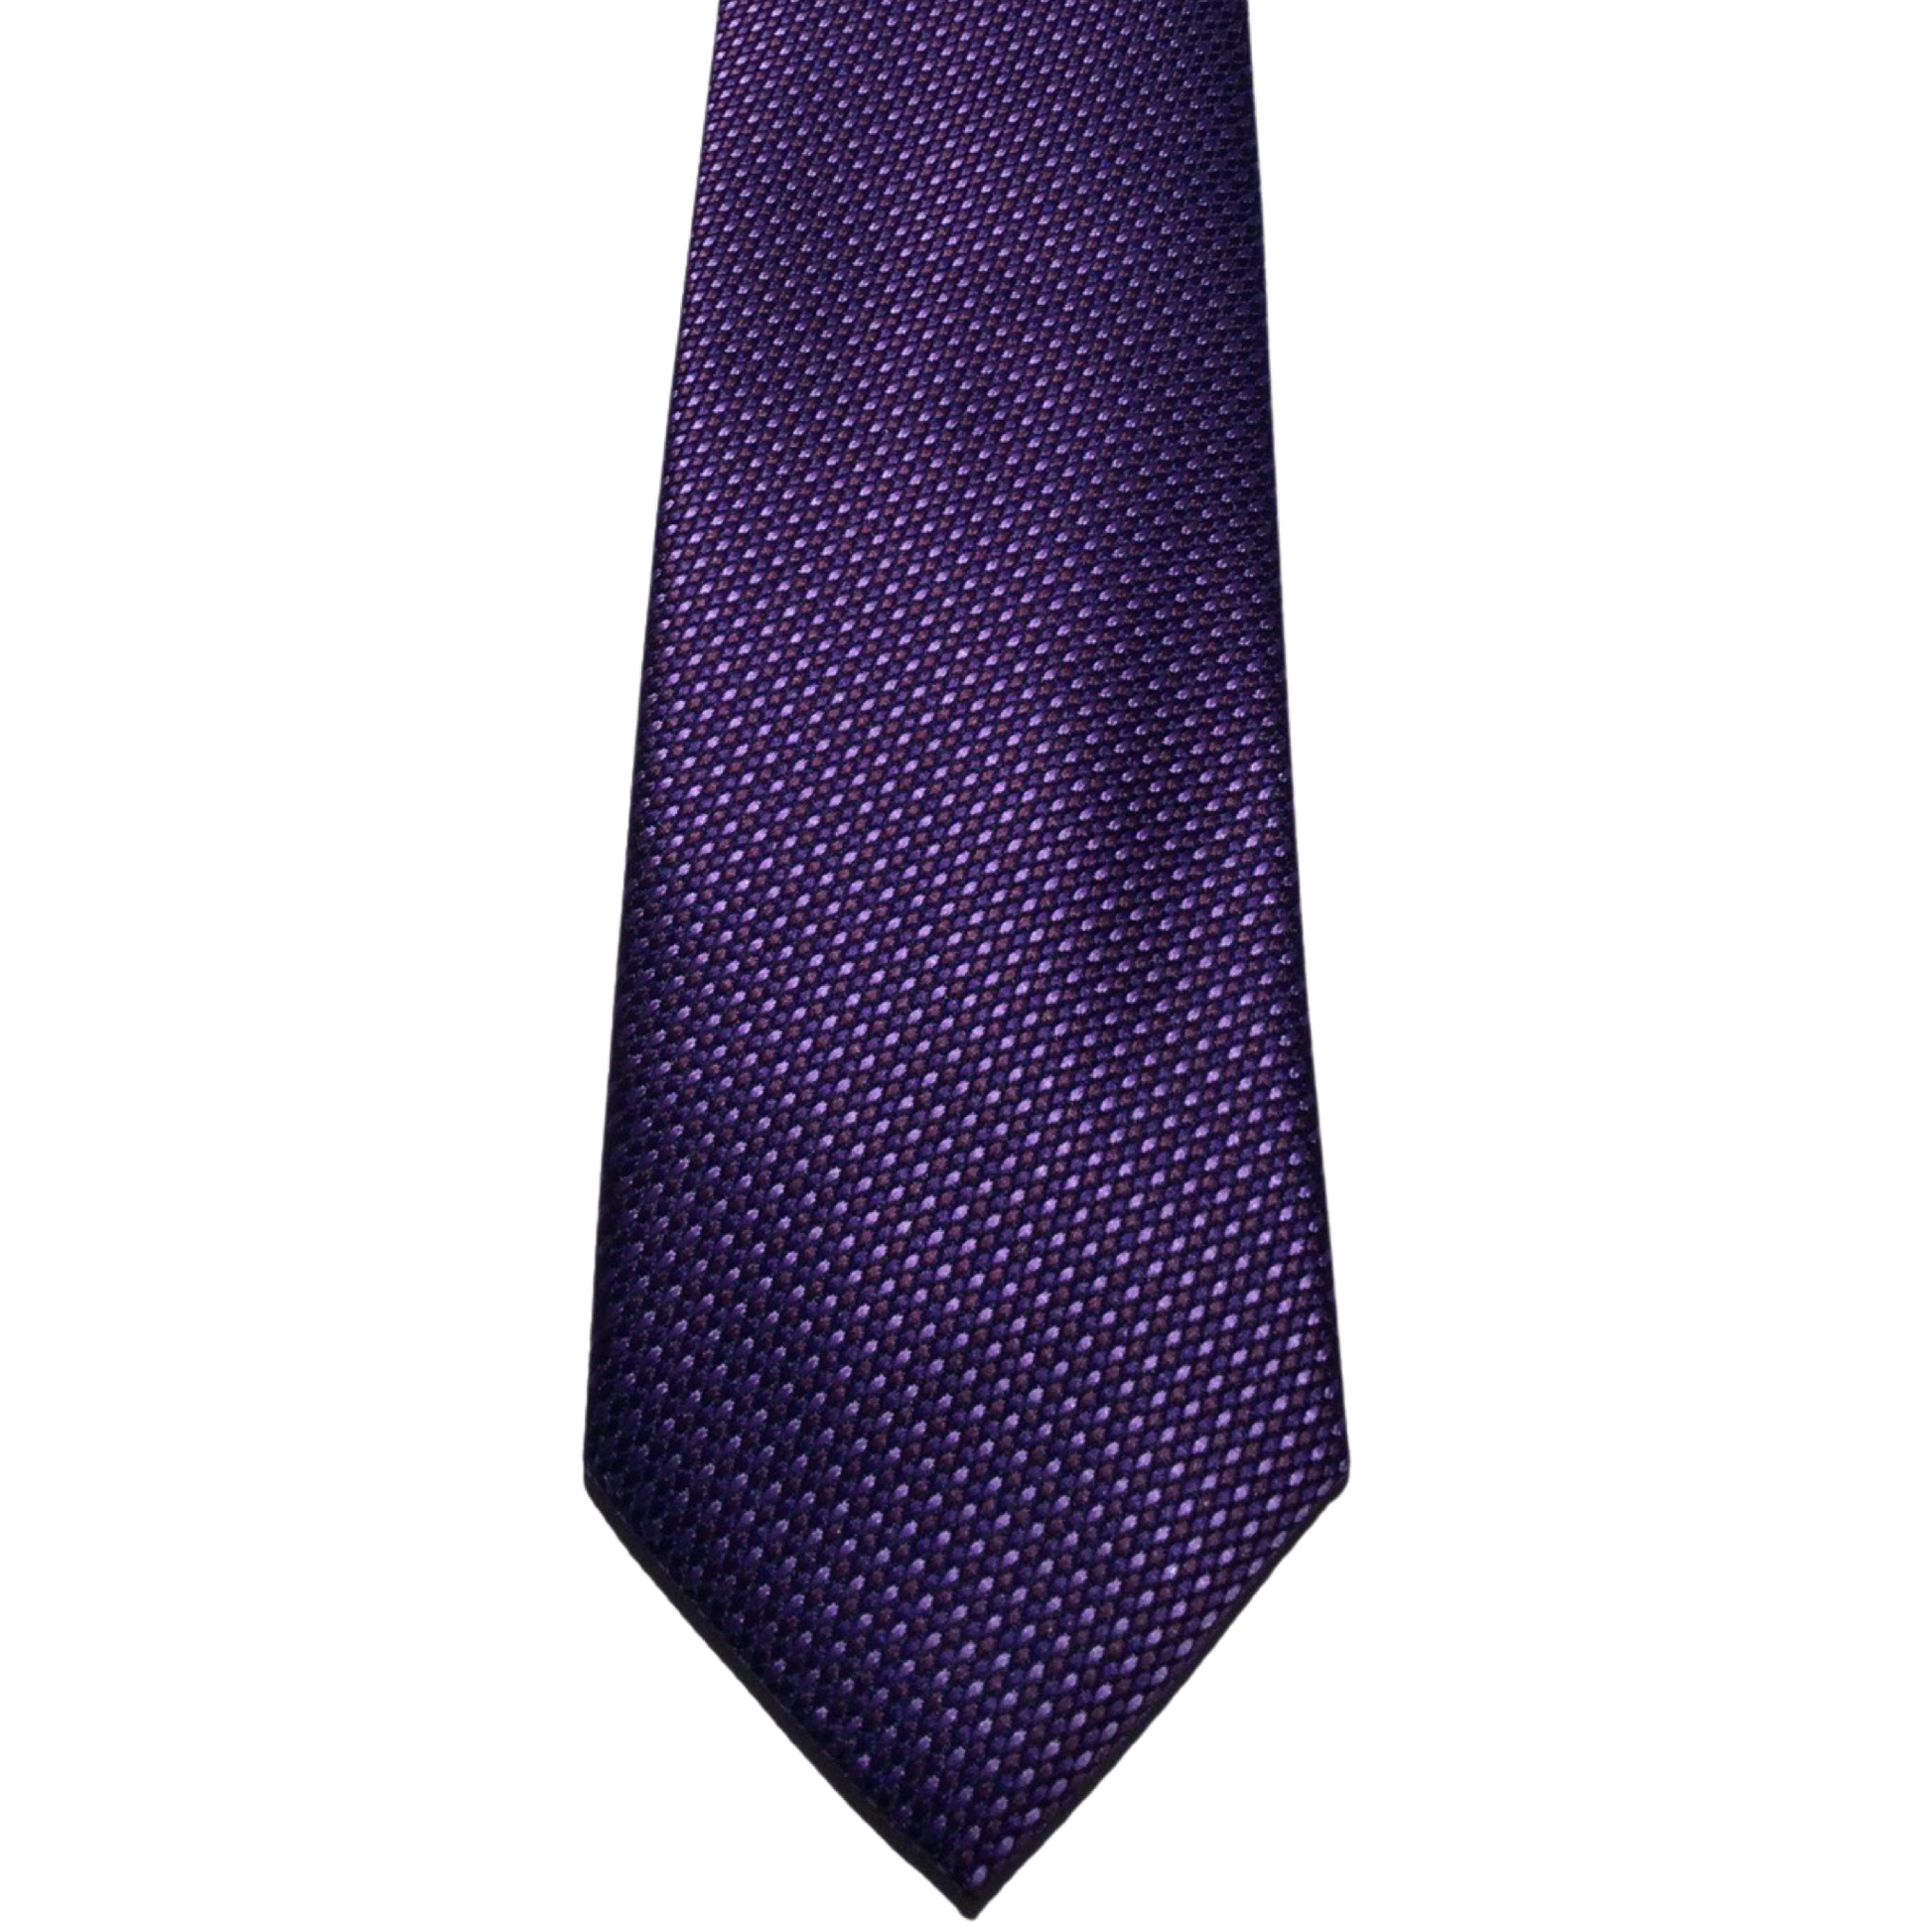 This Gian Marco Venturi microfibre purple tie is a nice pairing with a crisp white or lavender Scoop dress shirt, a navy blue suit and brown shoes.